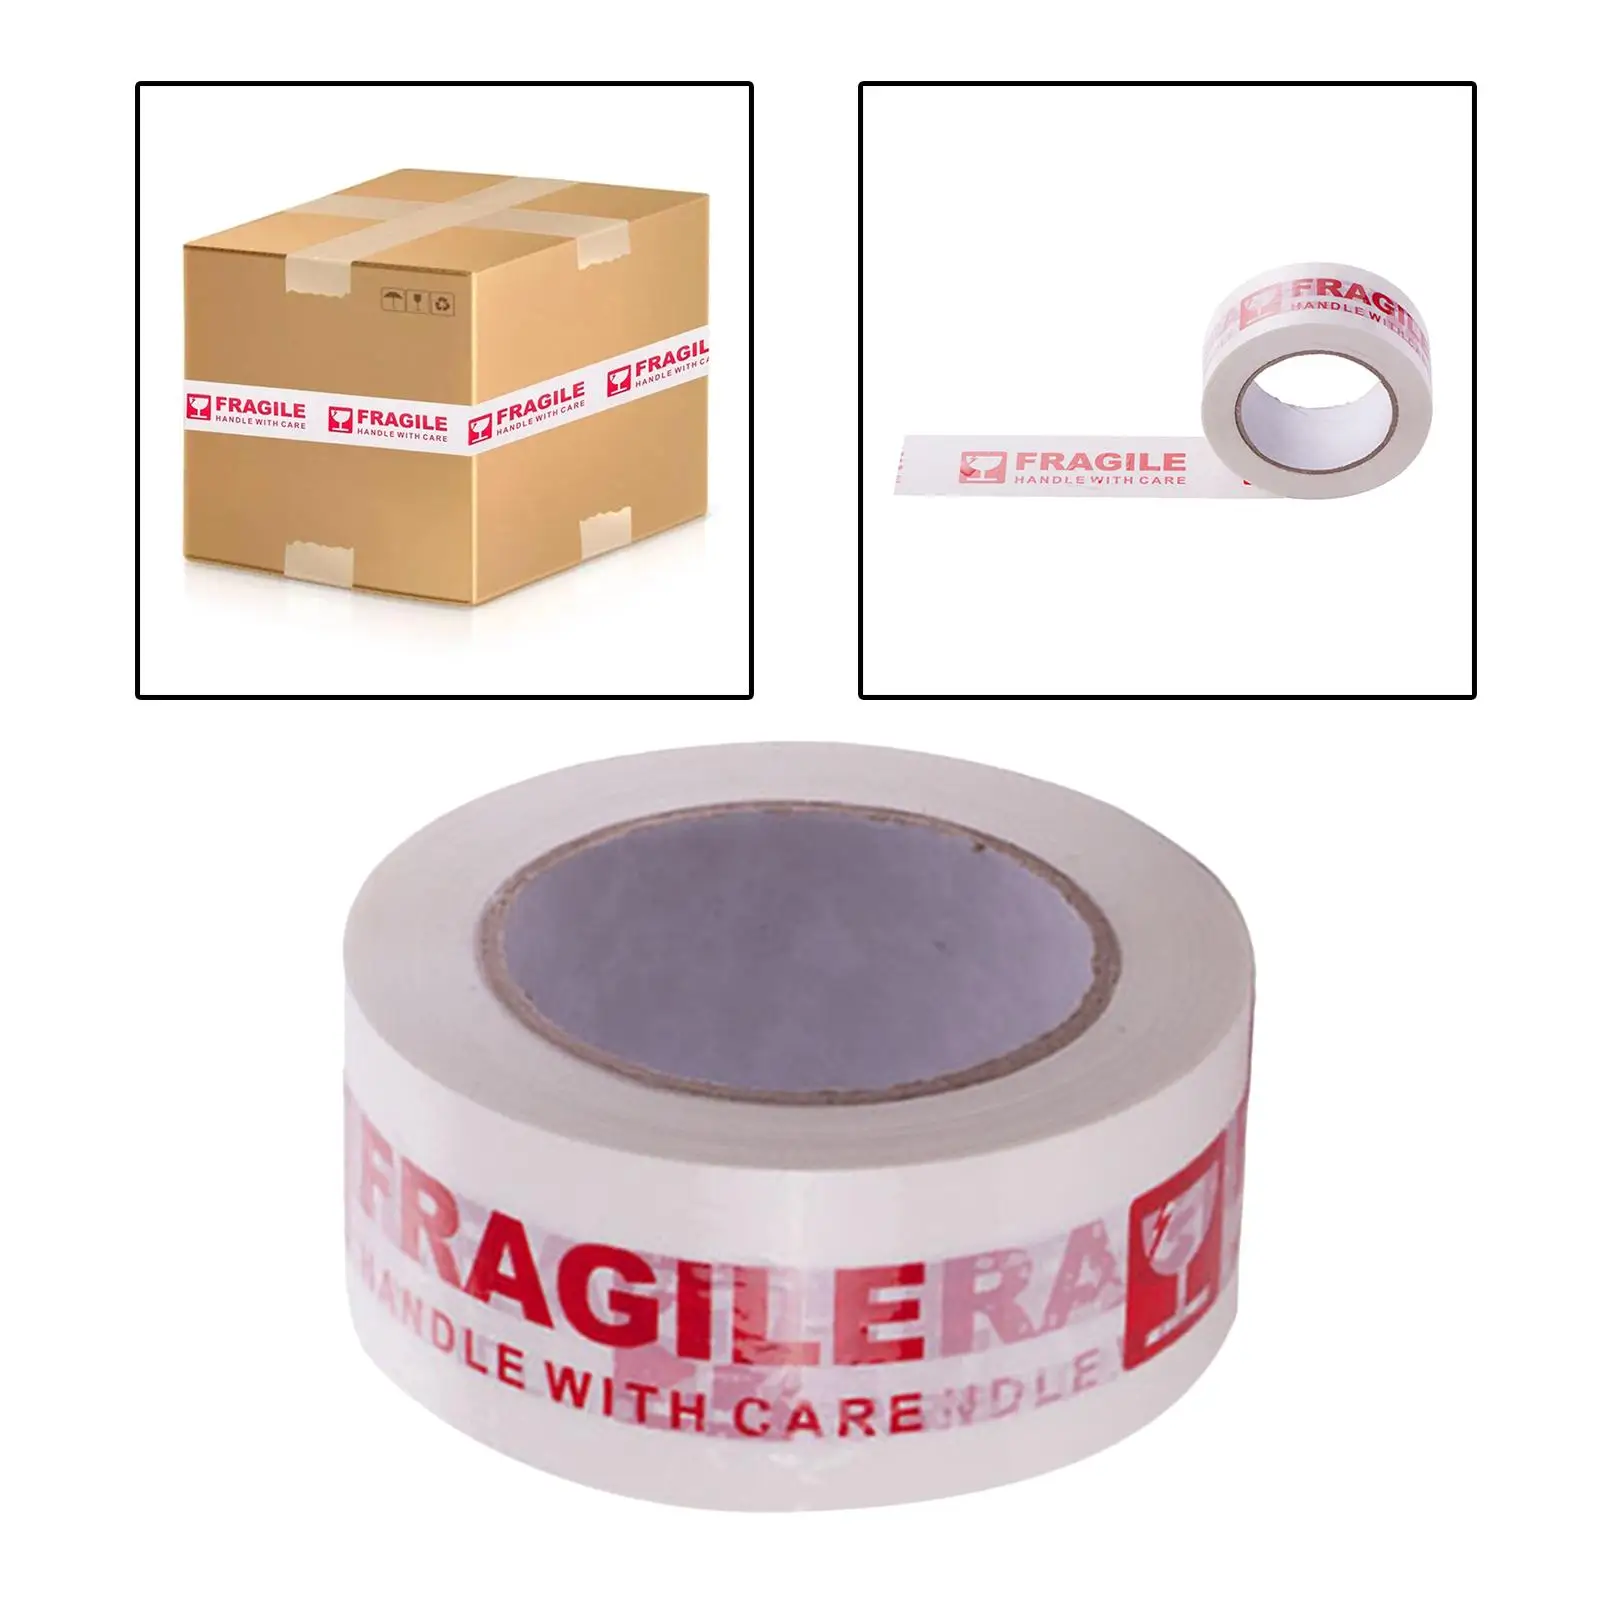 Fragile Handle with Care Packing Shipping Carton Box Sealing Tape